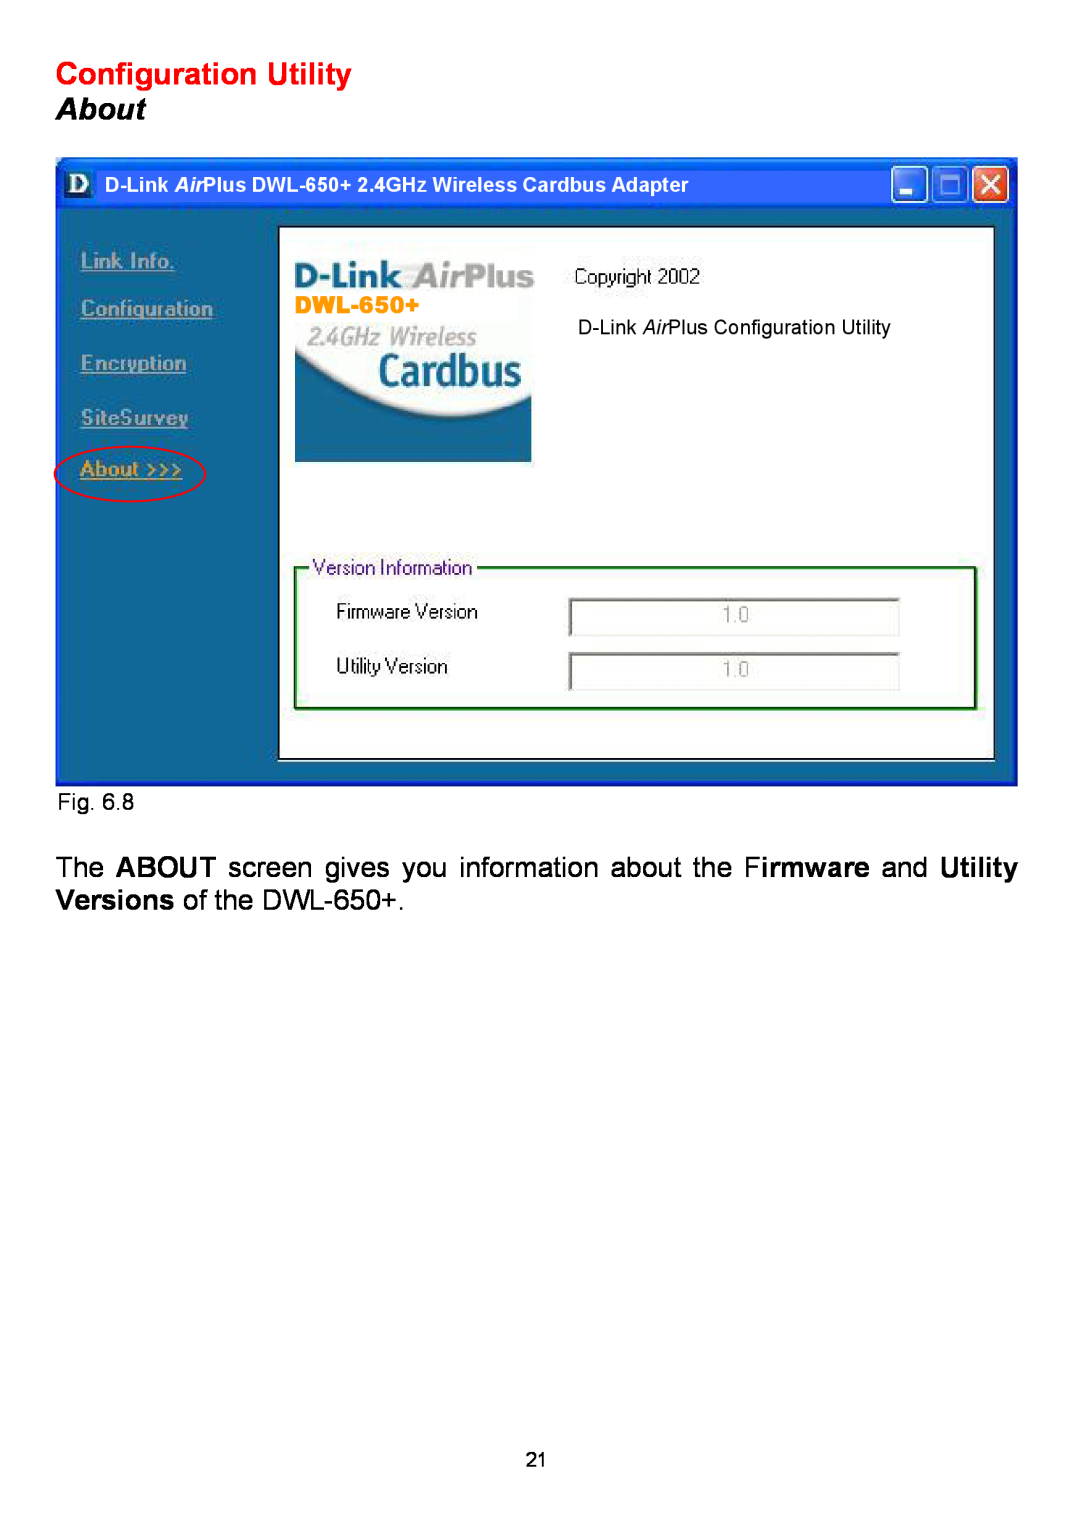 D-Link manual About, Configuration Utility, D-Link AirPlus DWL-650+ 2.4GHz Wireless Cardbus Adapter 